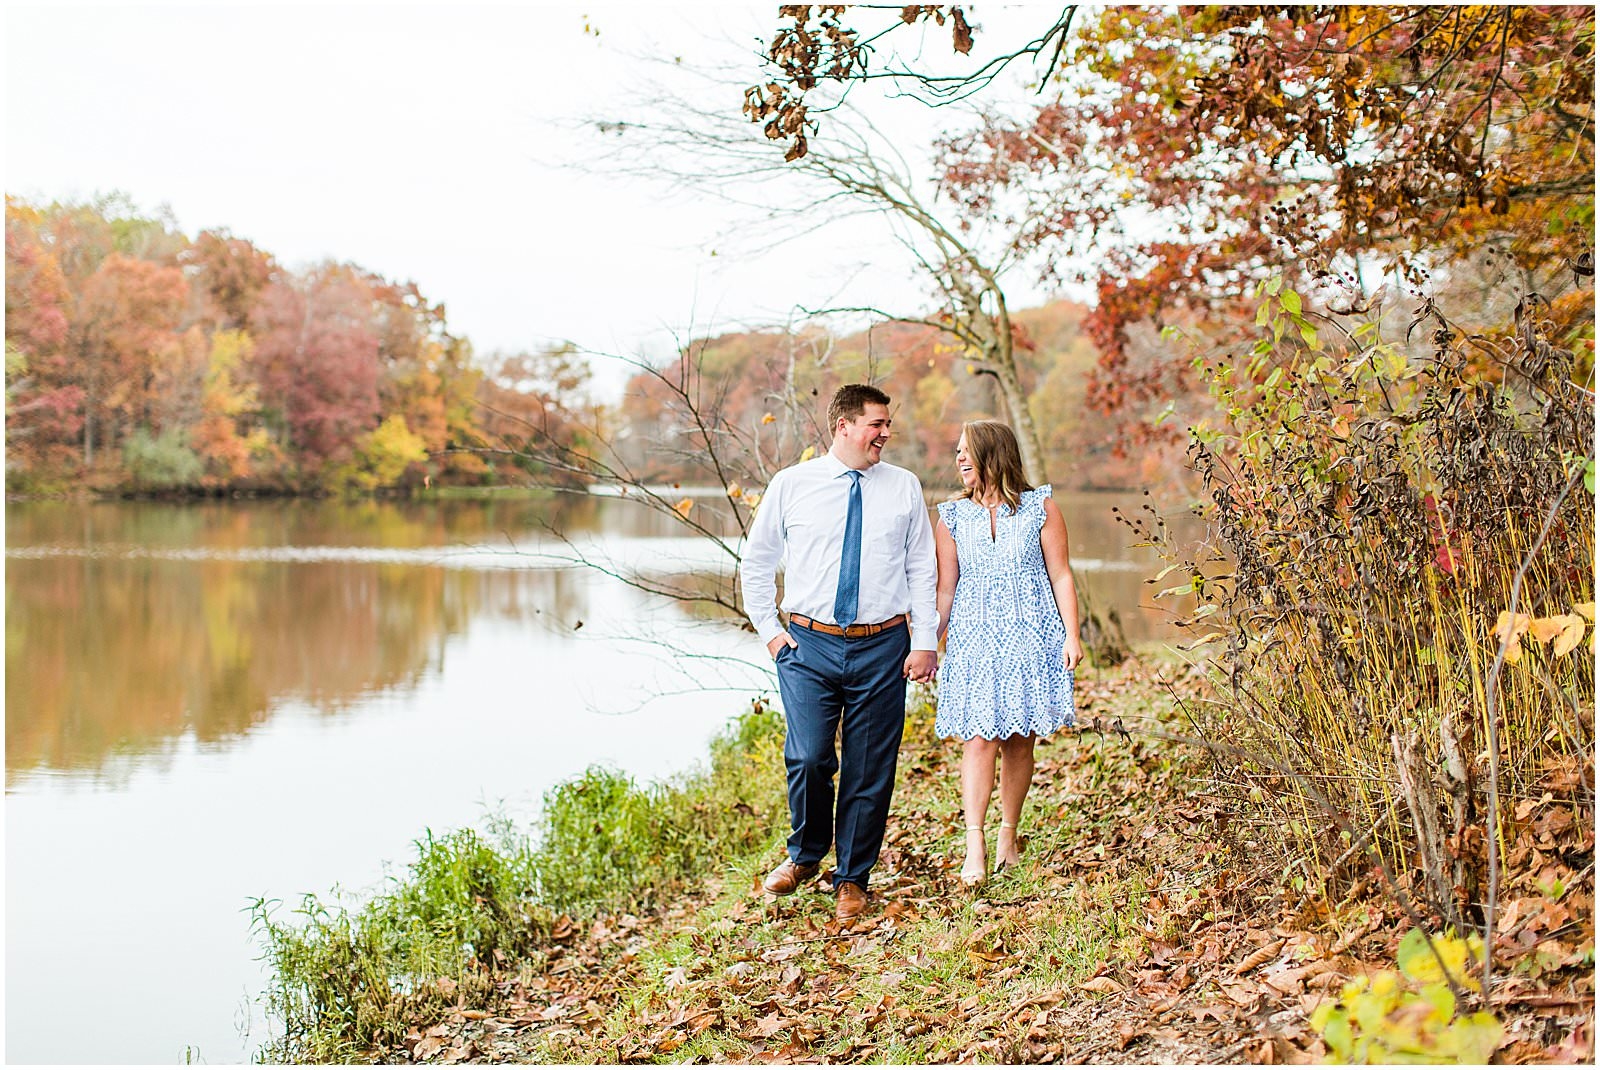 A Southern Illinois Engagement Session | Roxanne and Matthew | Bret and Brandie Photography 0011.jpg